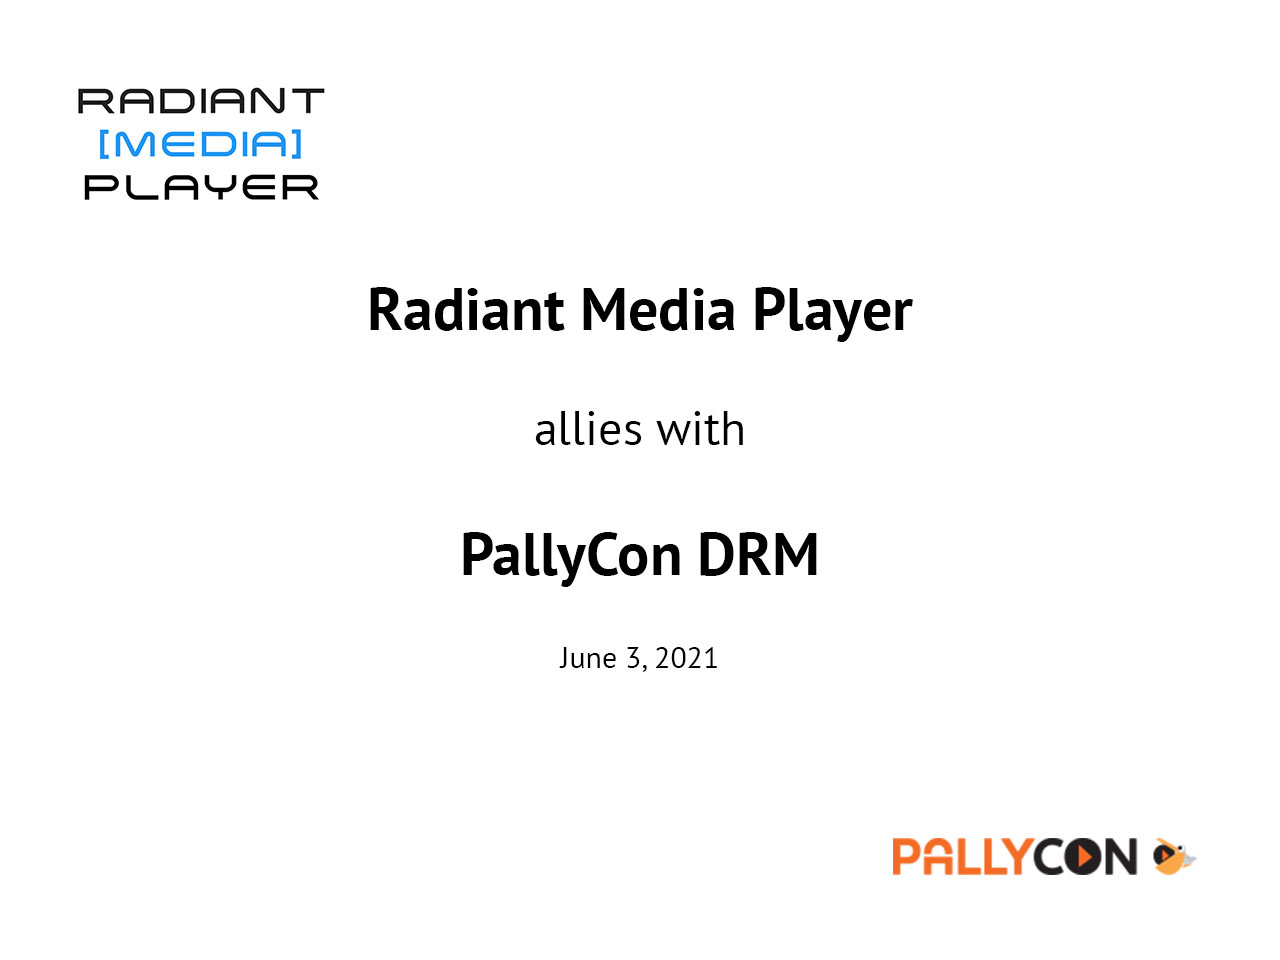 Radiant Media Player allies with PallyCon Multi-DRM